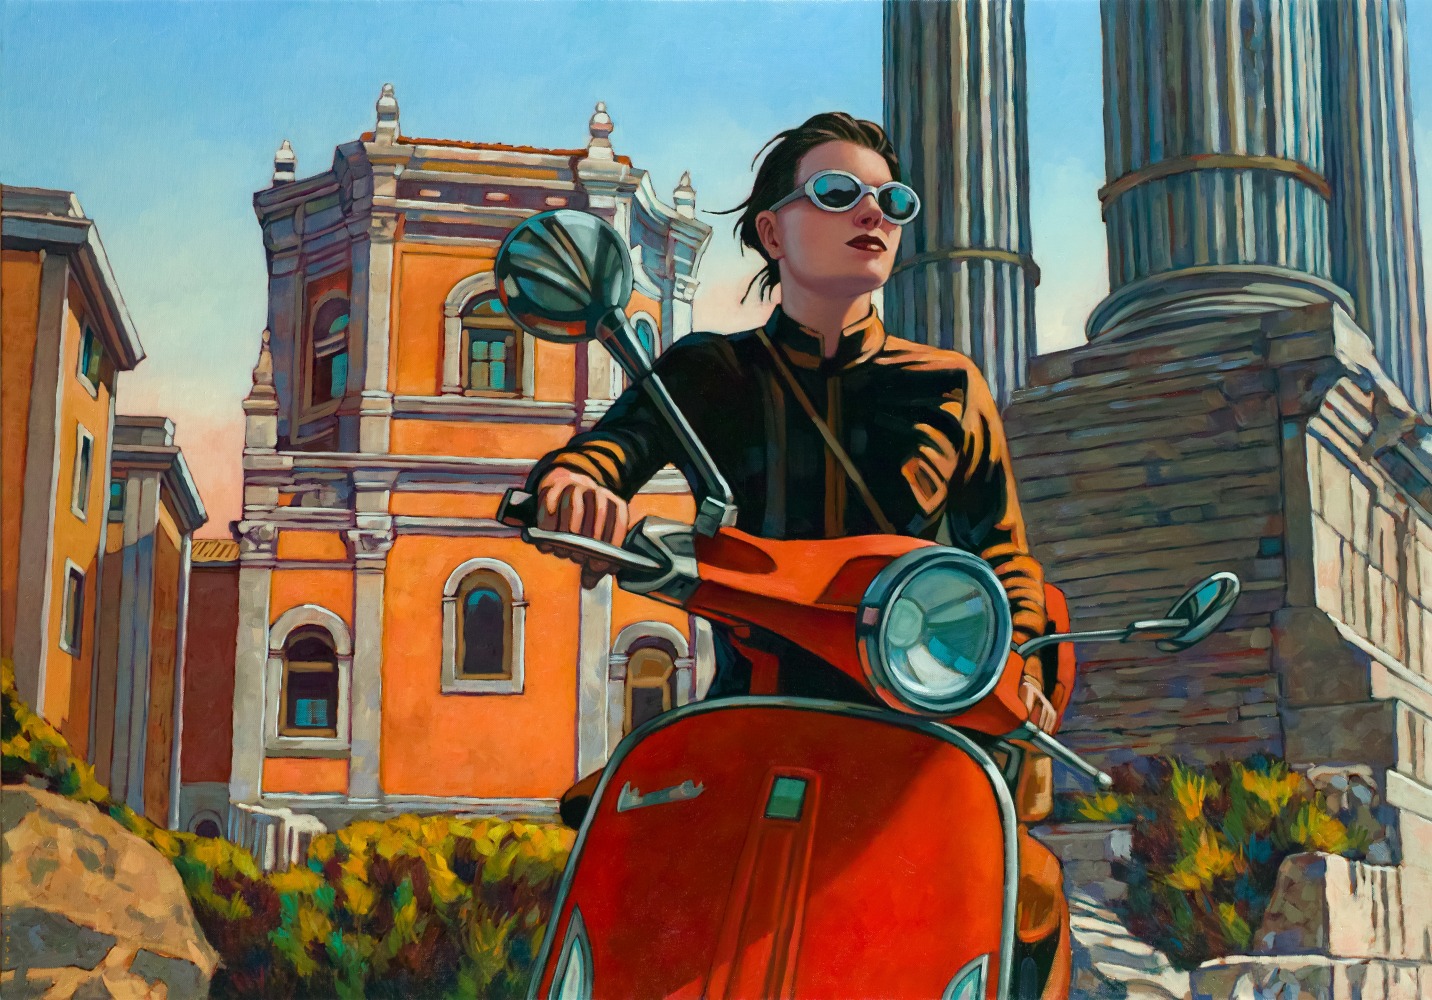 Forum, Rome, 2021
Oil on linen
32 x 45 5/7 x 1 1/2 inches

$14,800 - Sold